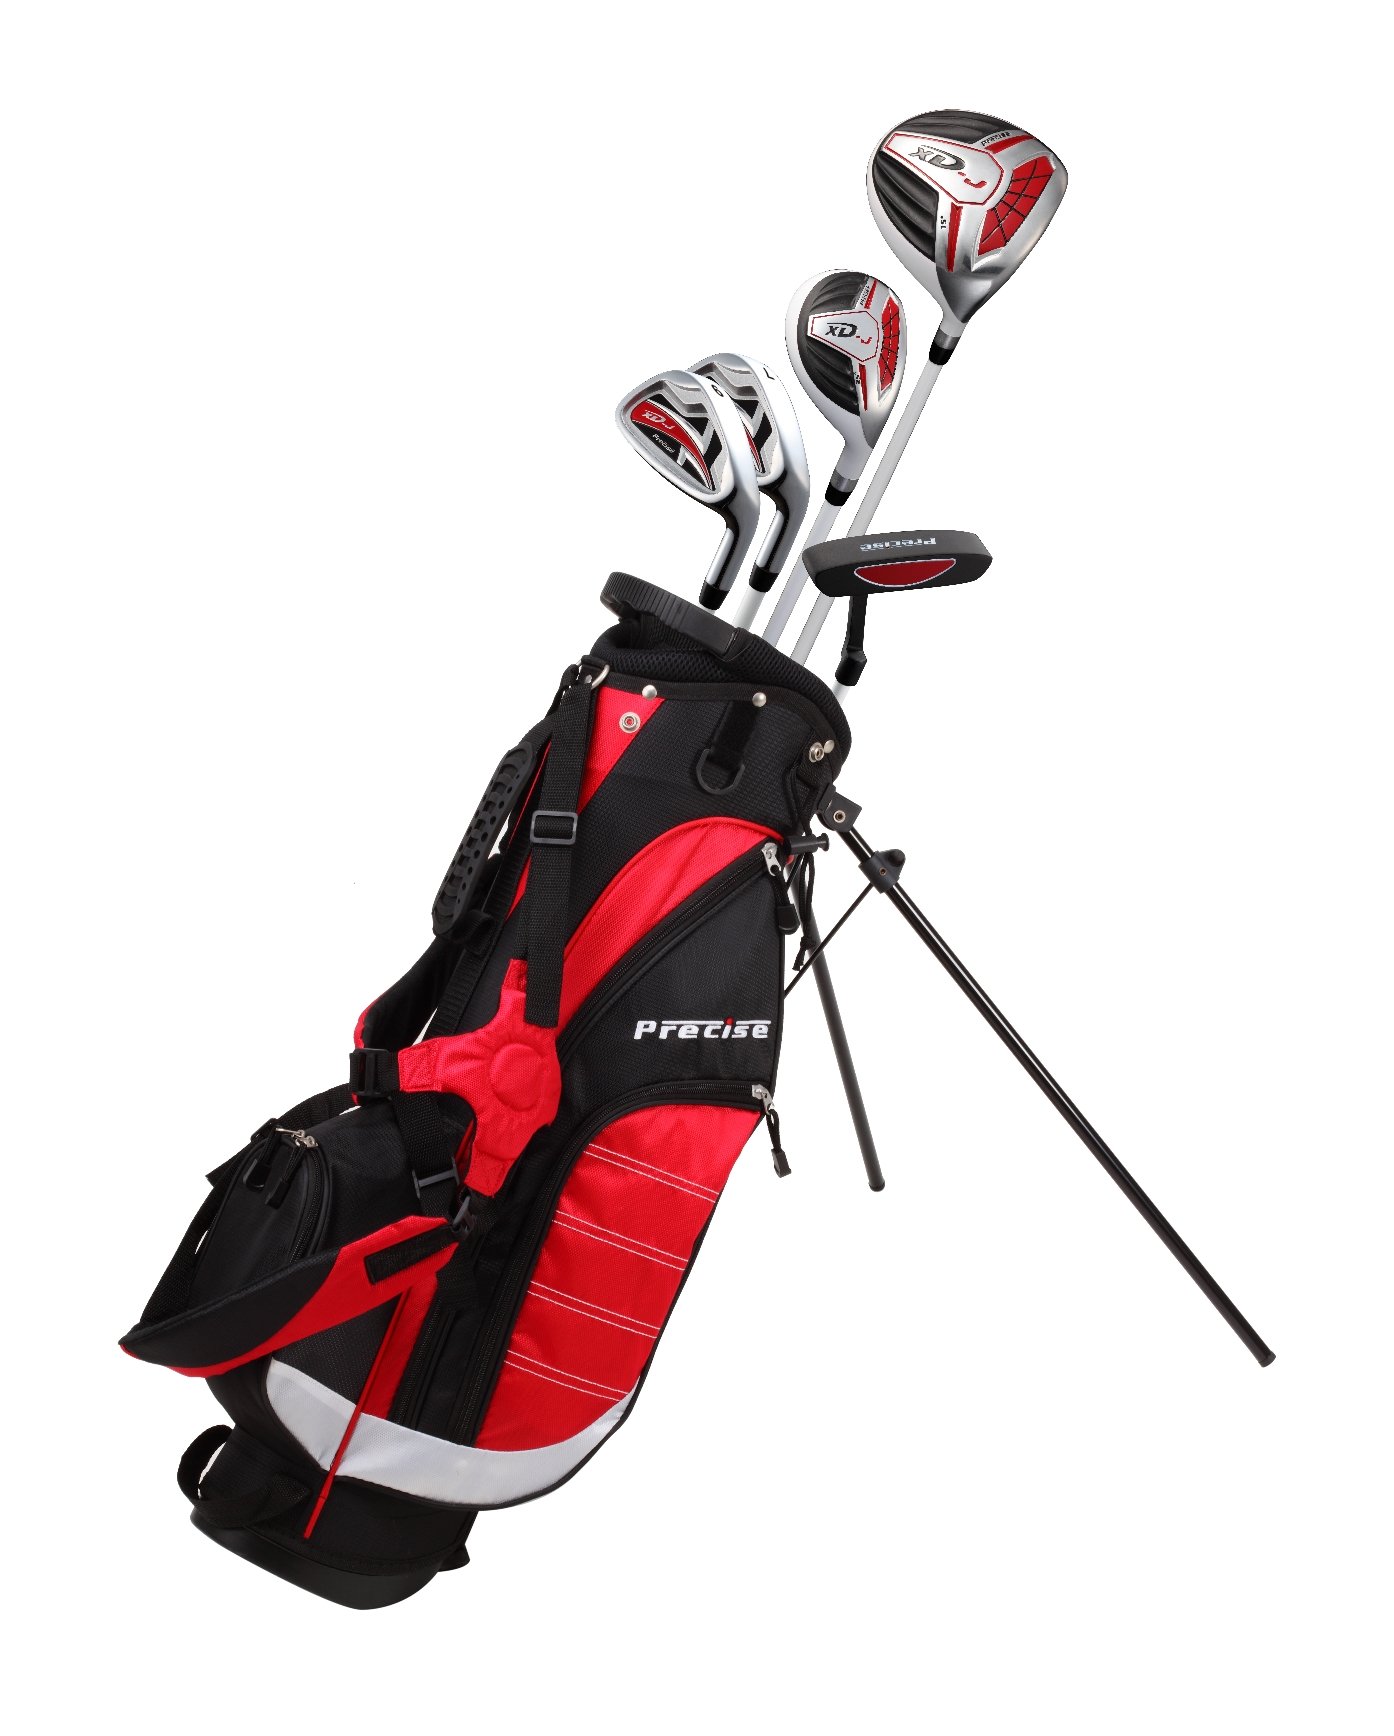 Remarkable Right Handed Junior Golf Club Set for Age 6 to 8 (Height 3'8